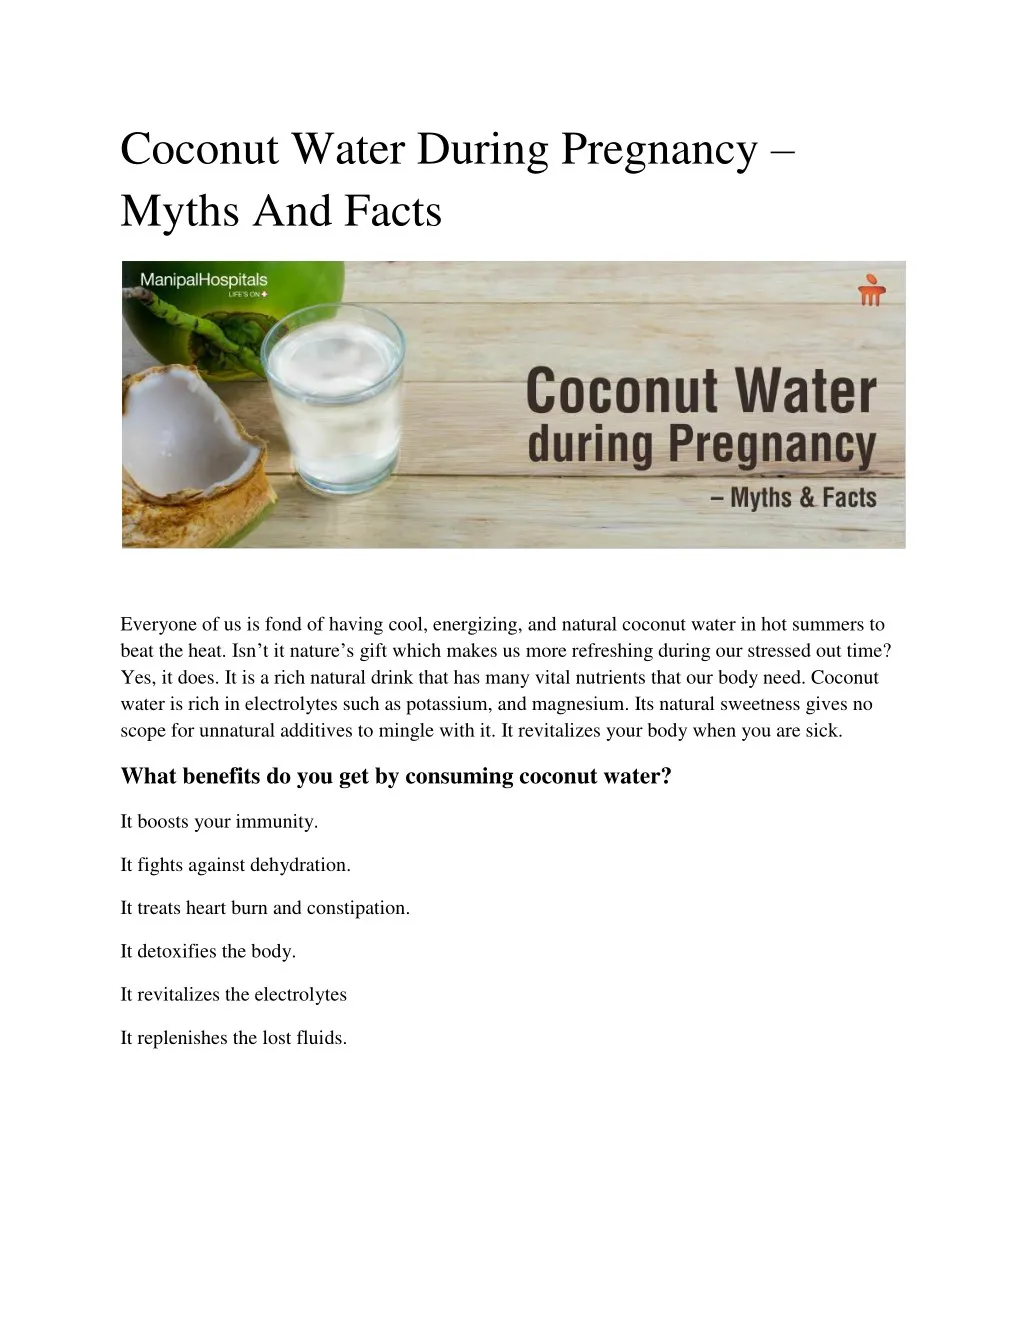 coconut water during pregnancy myths and facts